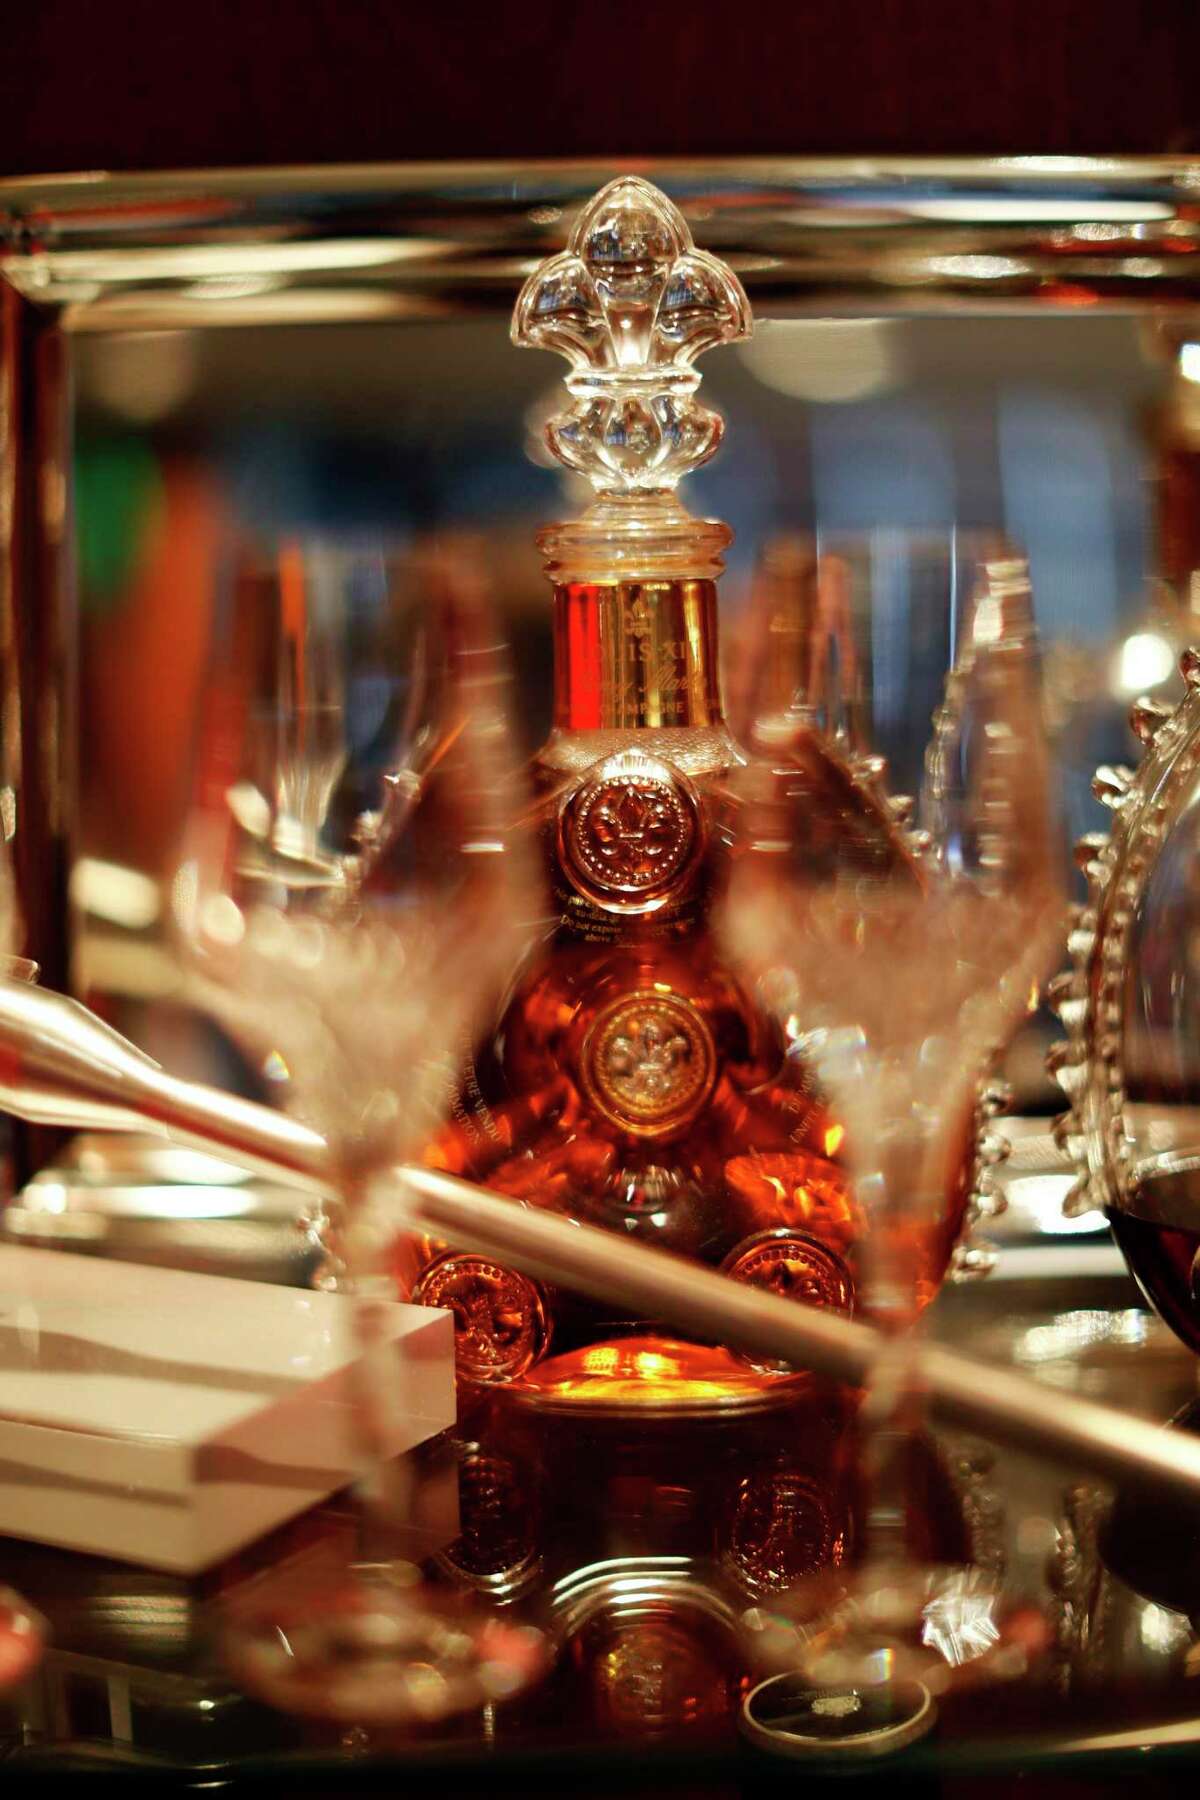 Louis XIII cognac at Alexander's Steakhouse in San Francisco, Calif., on Wednesday, August 28, 2019.